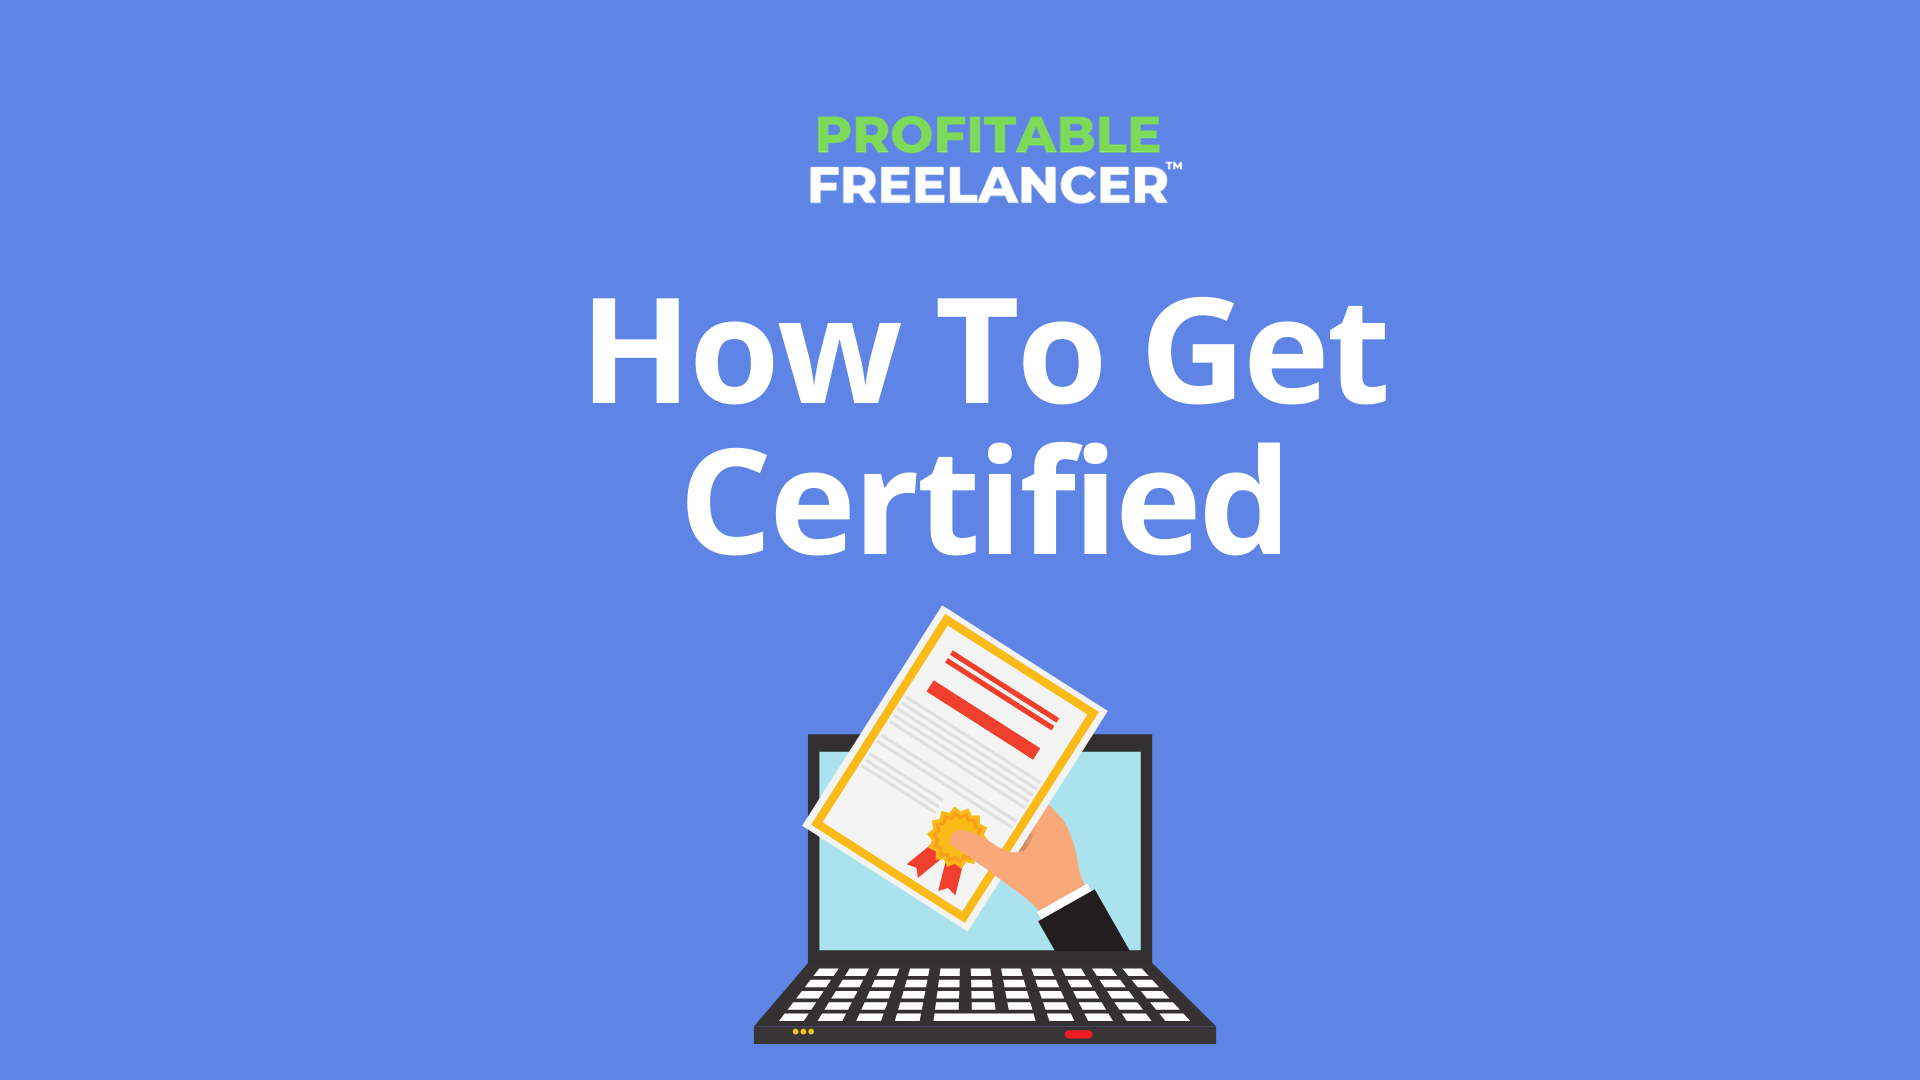 How to get certified on Upwork as a freelancer